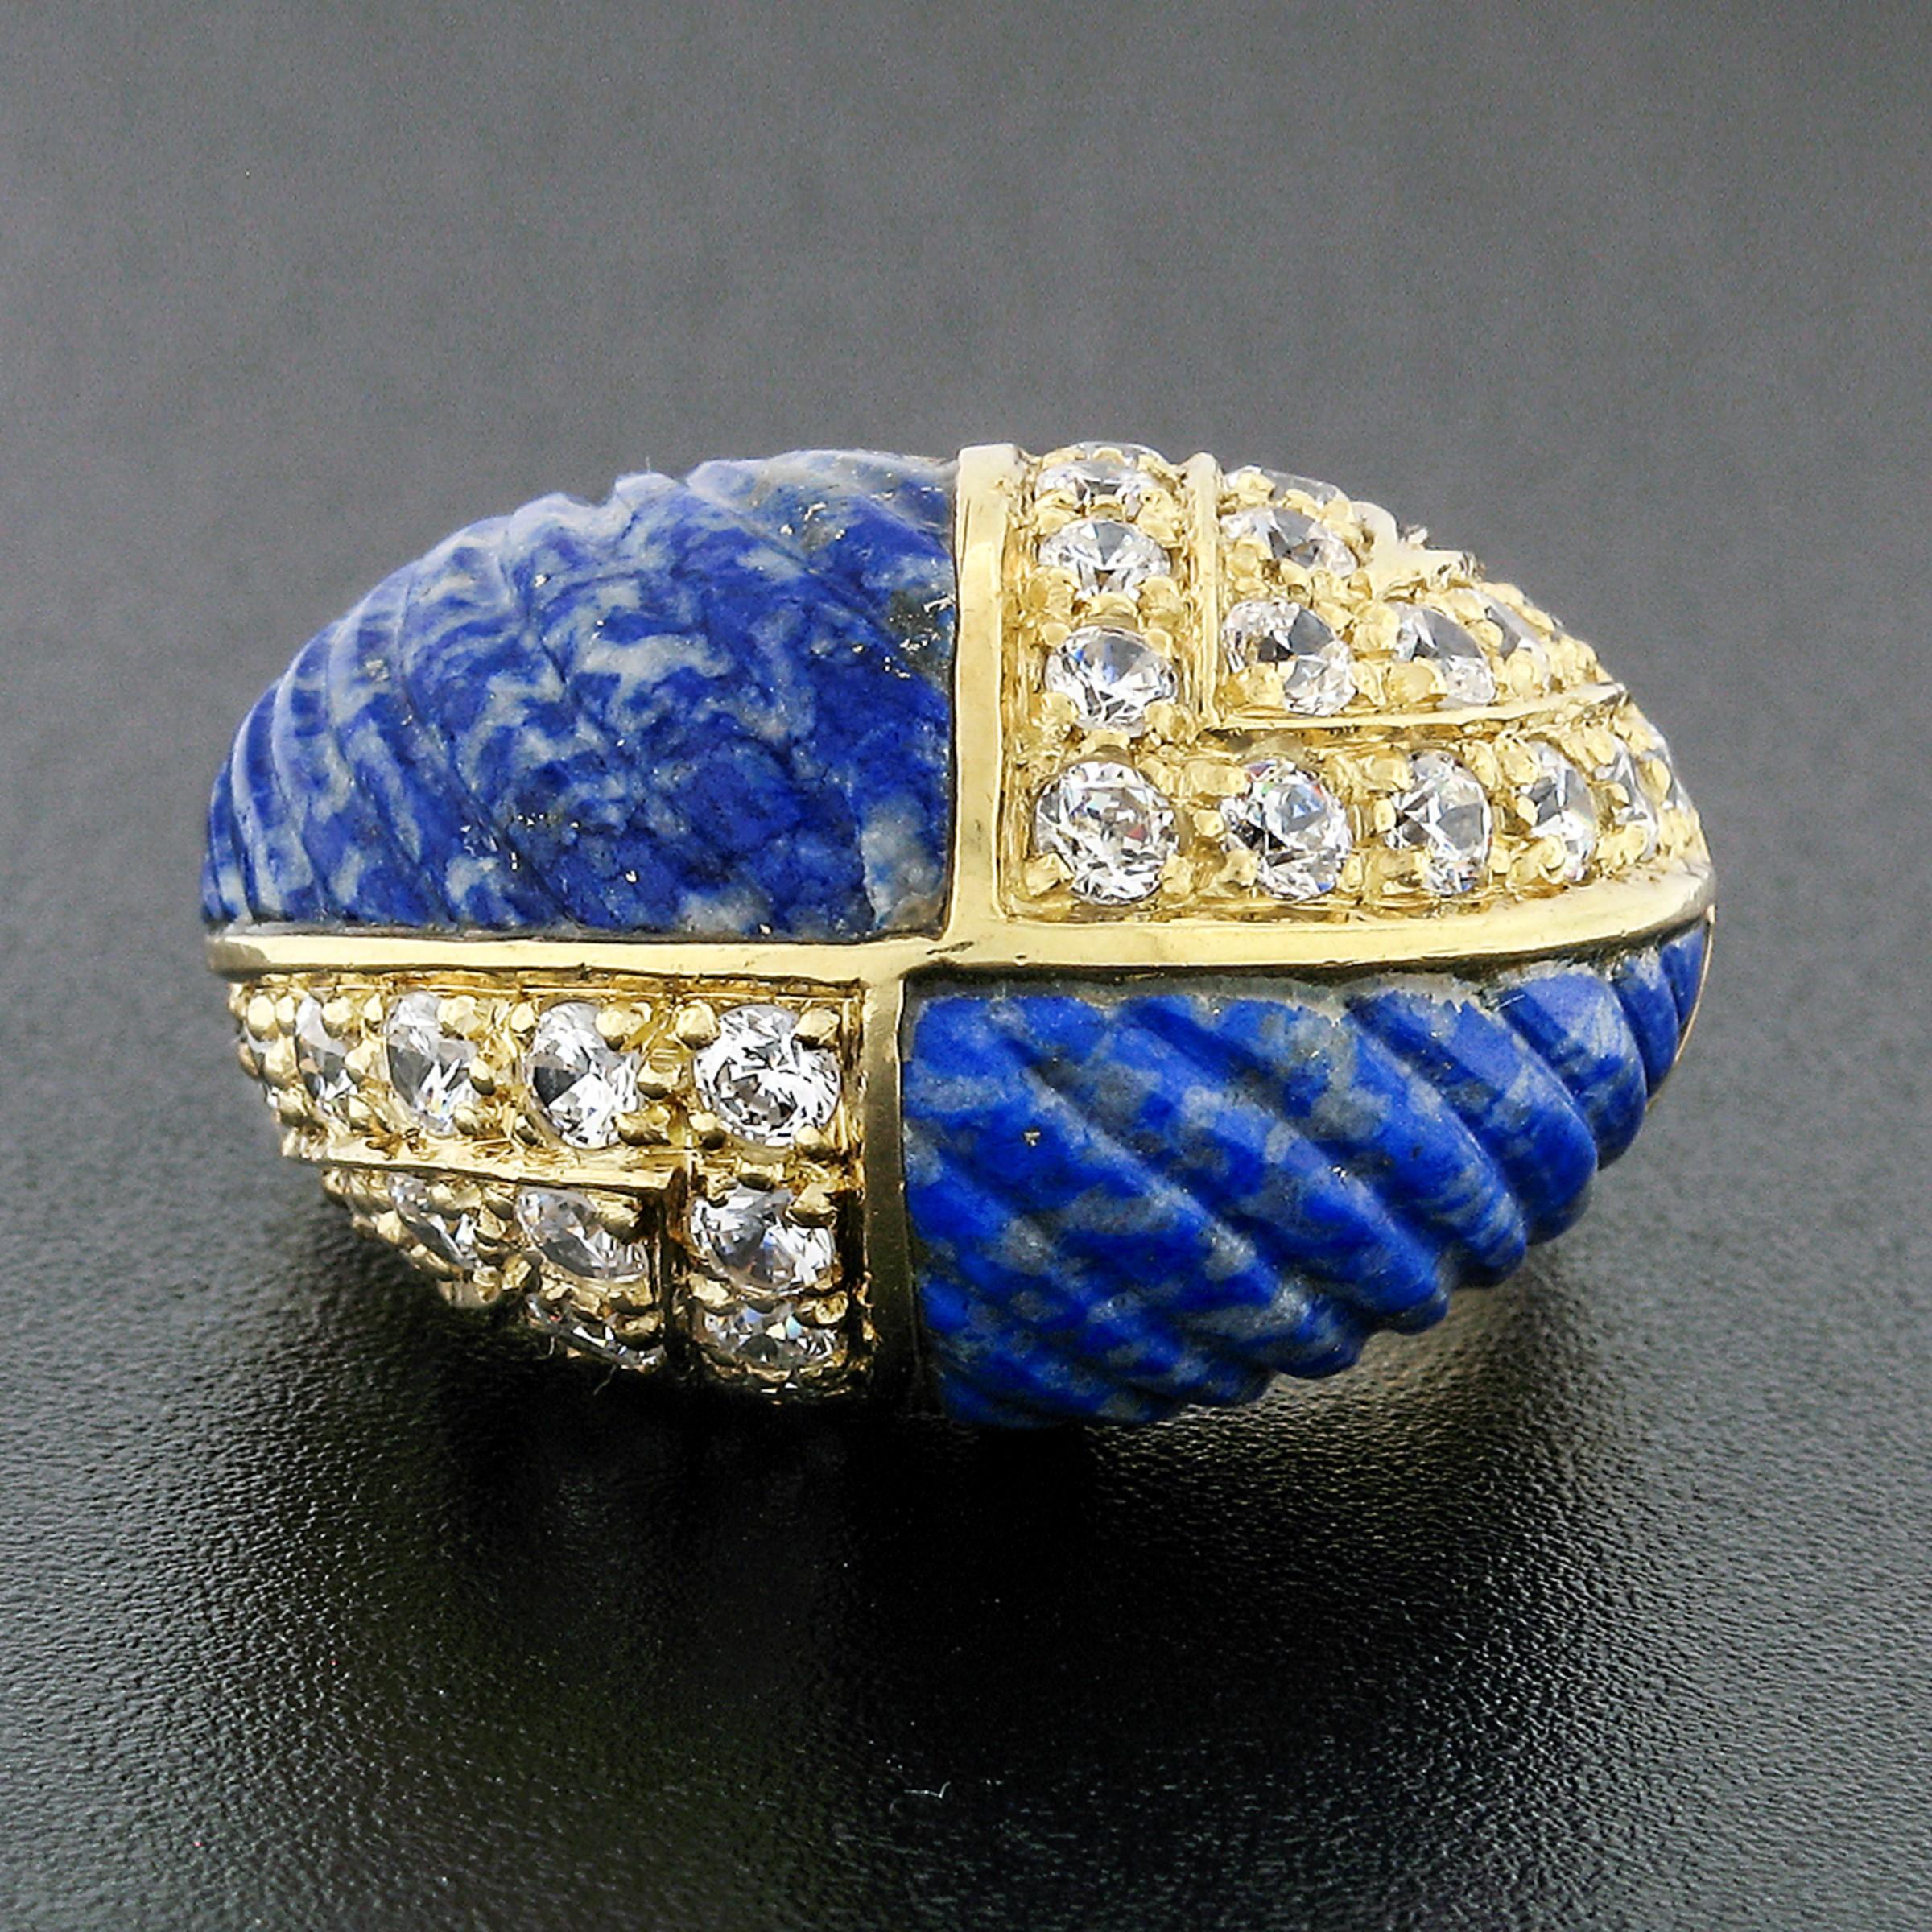 This beautiful vintage bombé ring was crafted from solid 18k yellow gold. It features a round dome with four sections, two of which display lapis that are carved with lined grooves, and the other two displaying round brilliant diamonds. The lapis